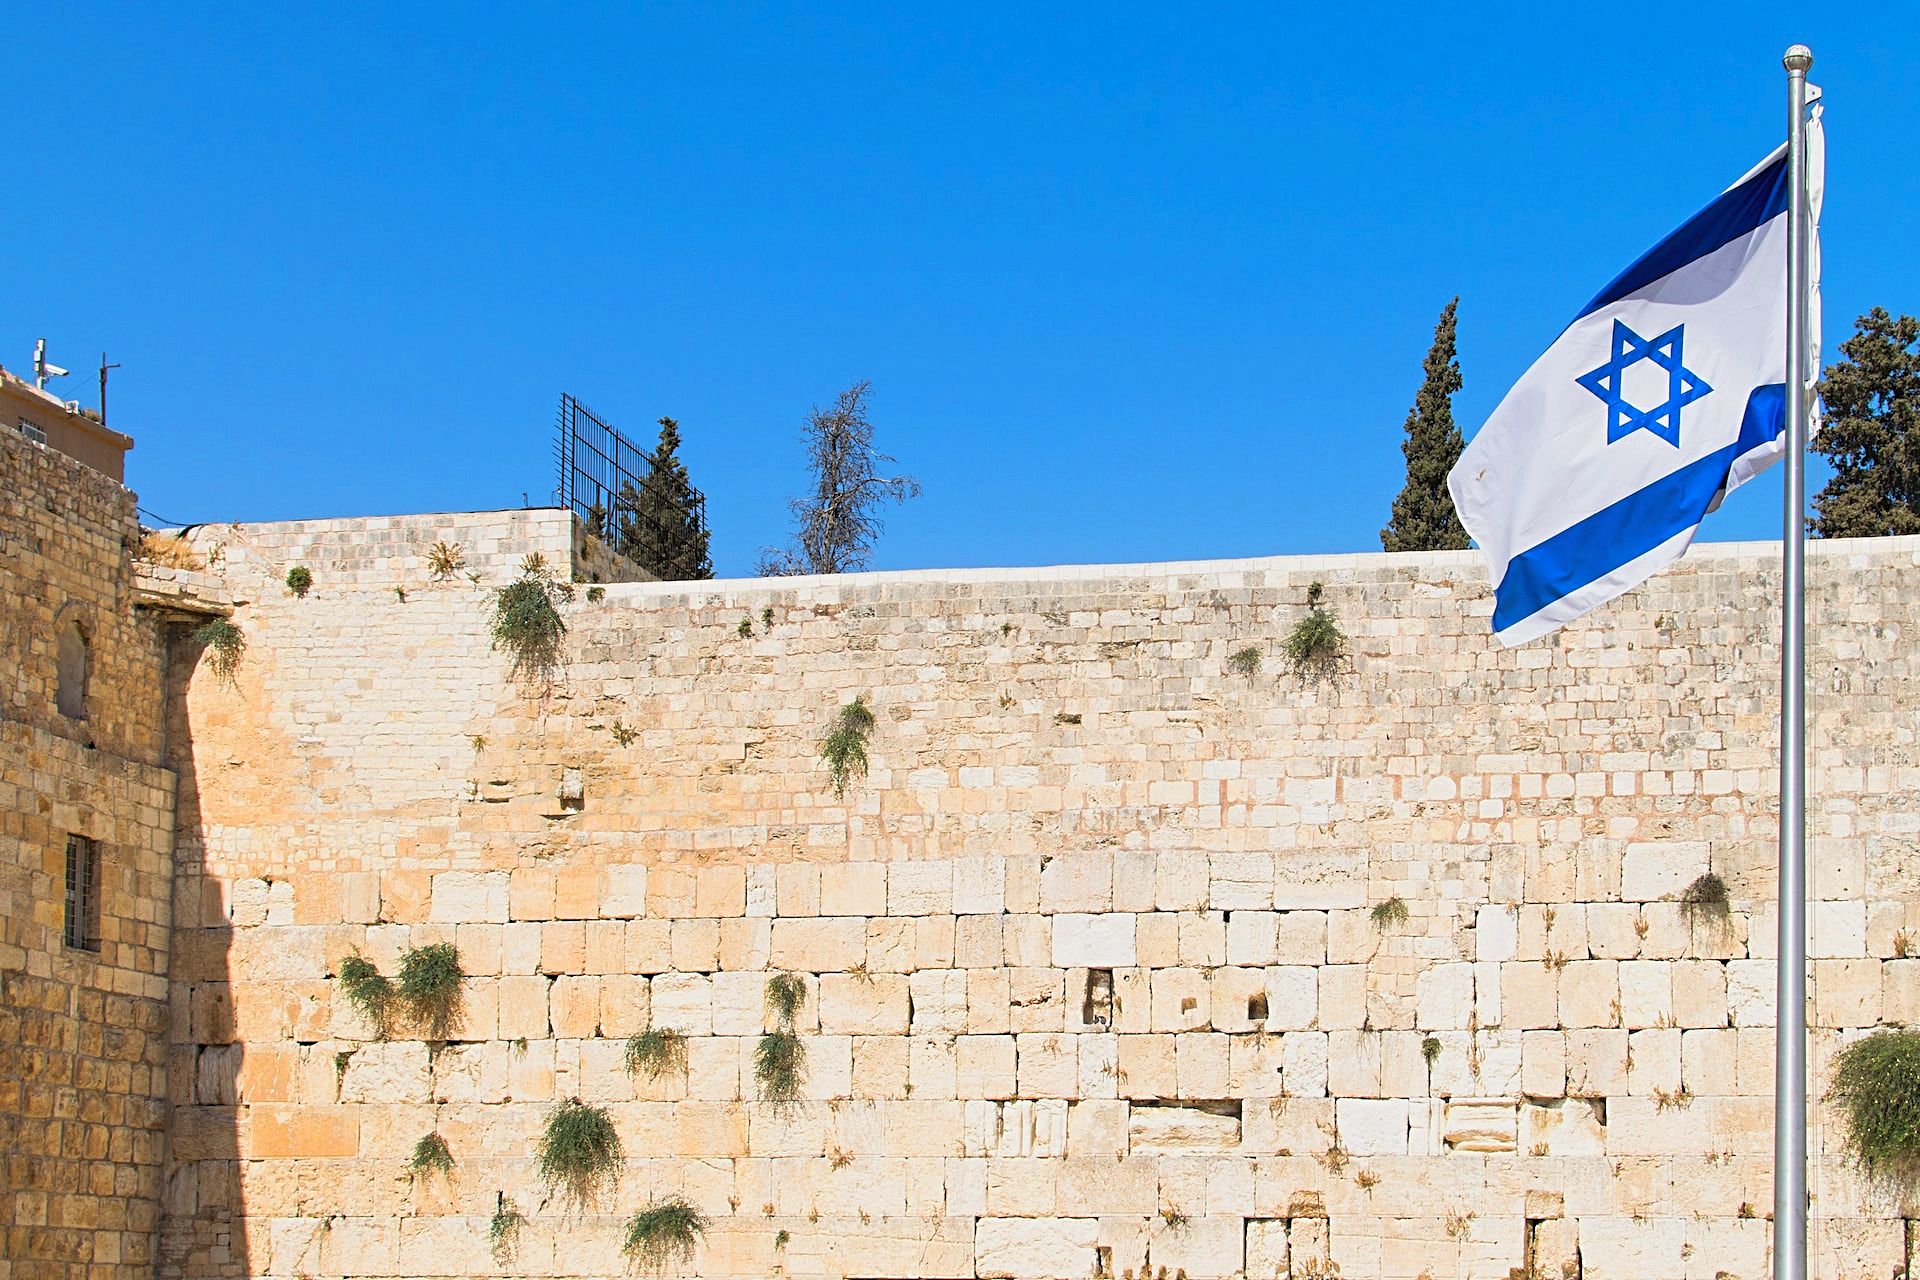 The Western Wall in Jerusalem with an Israeli flag in the foreground